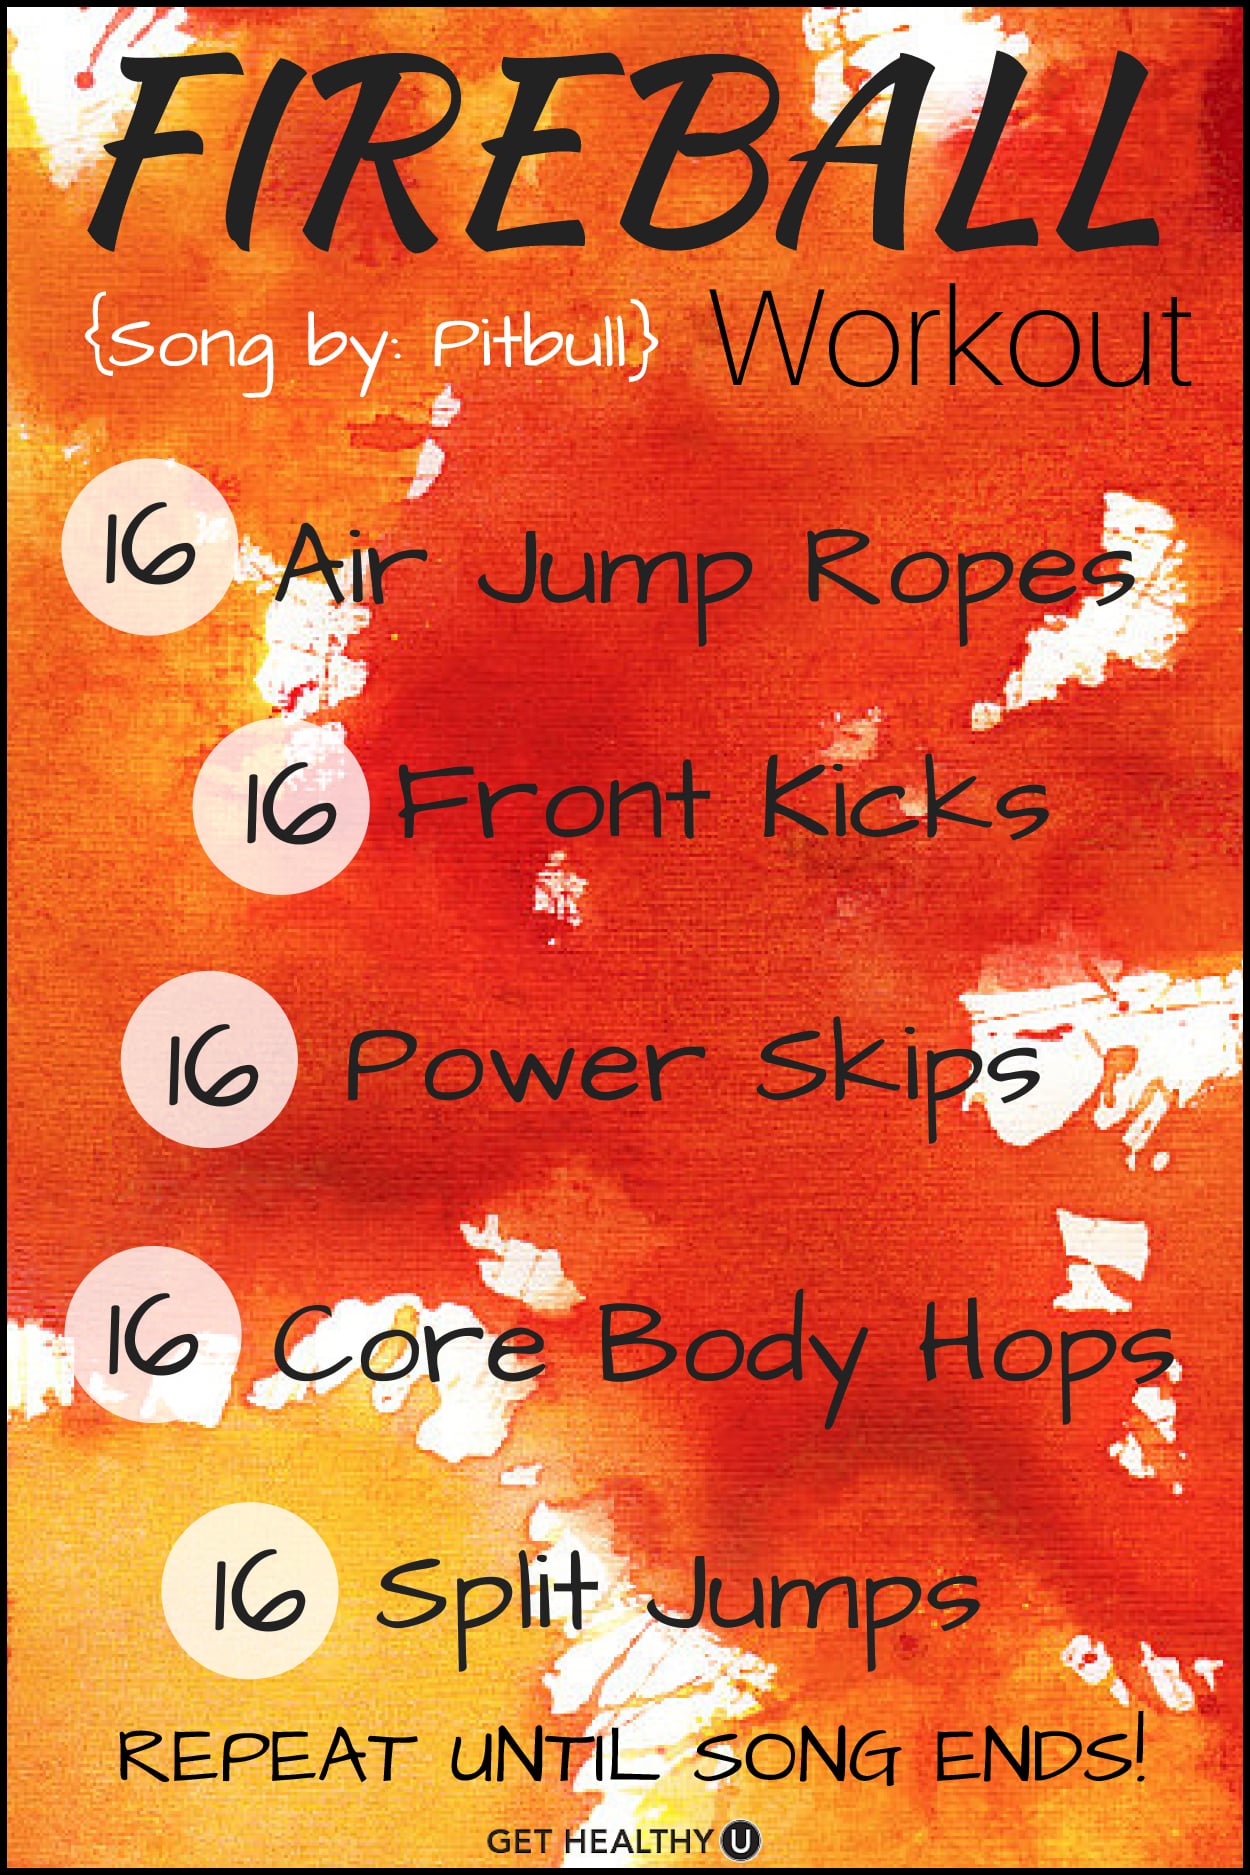 Turn up the tunes and get sweating! This is a no-equipment one song workout for Fireball!